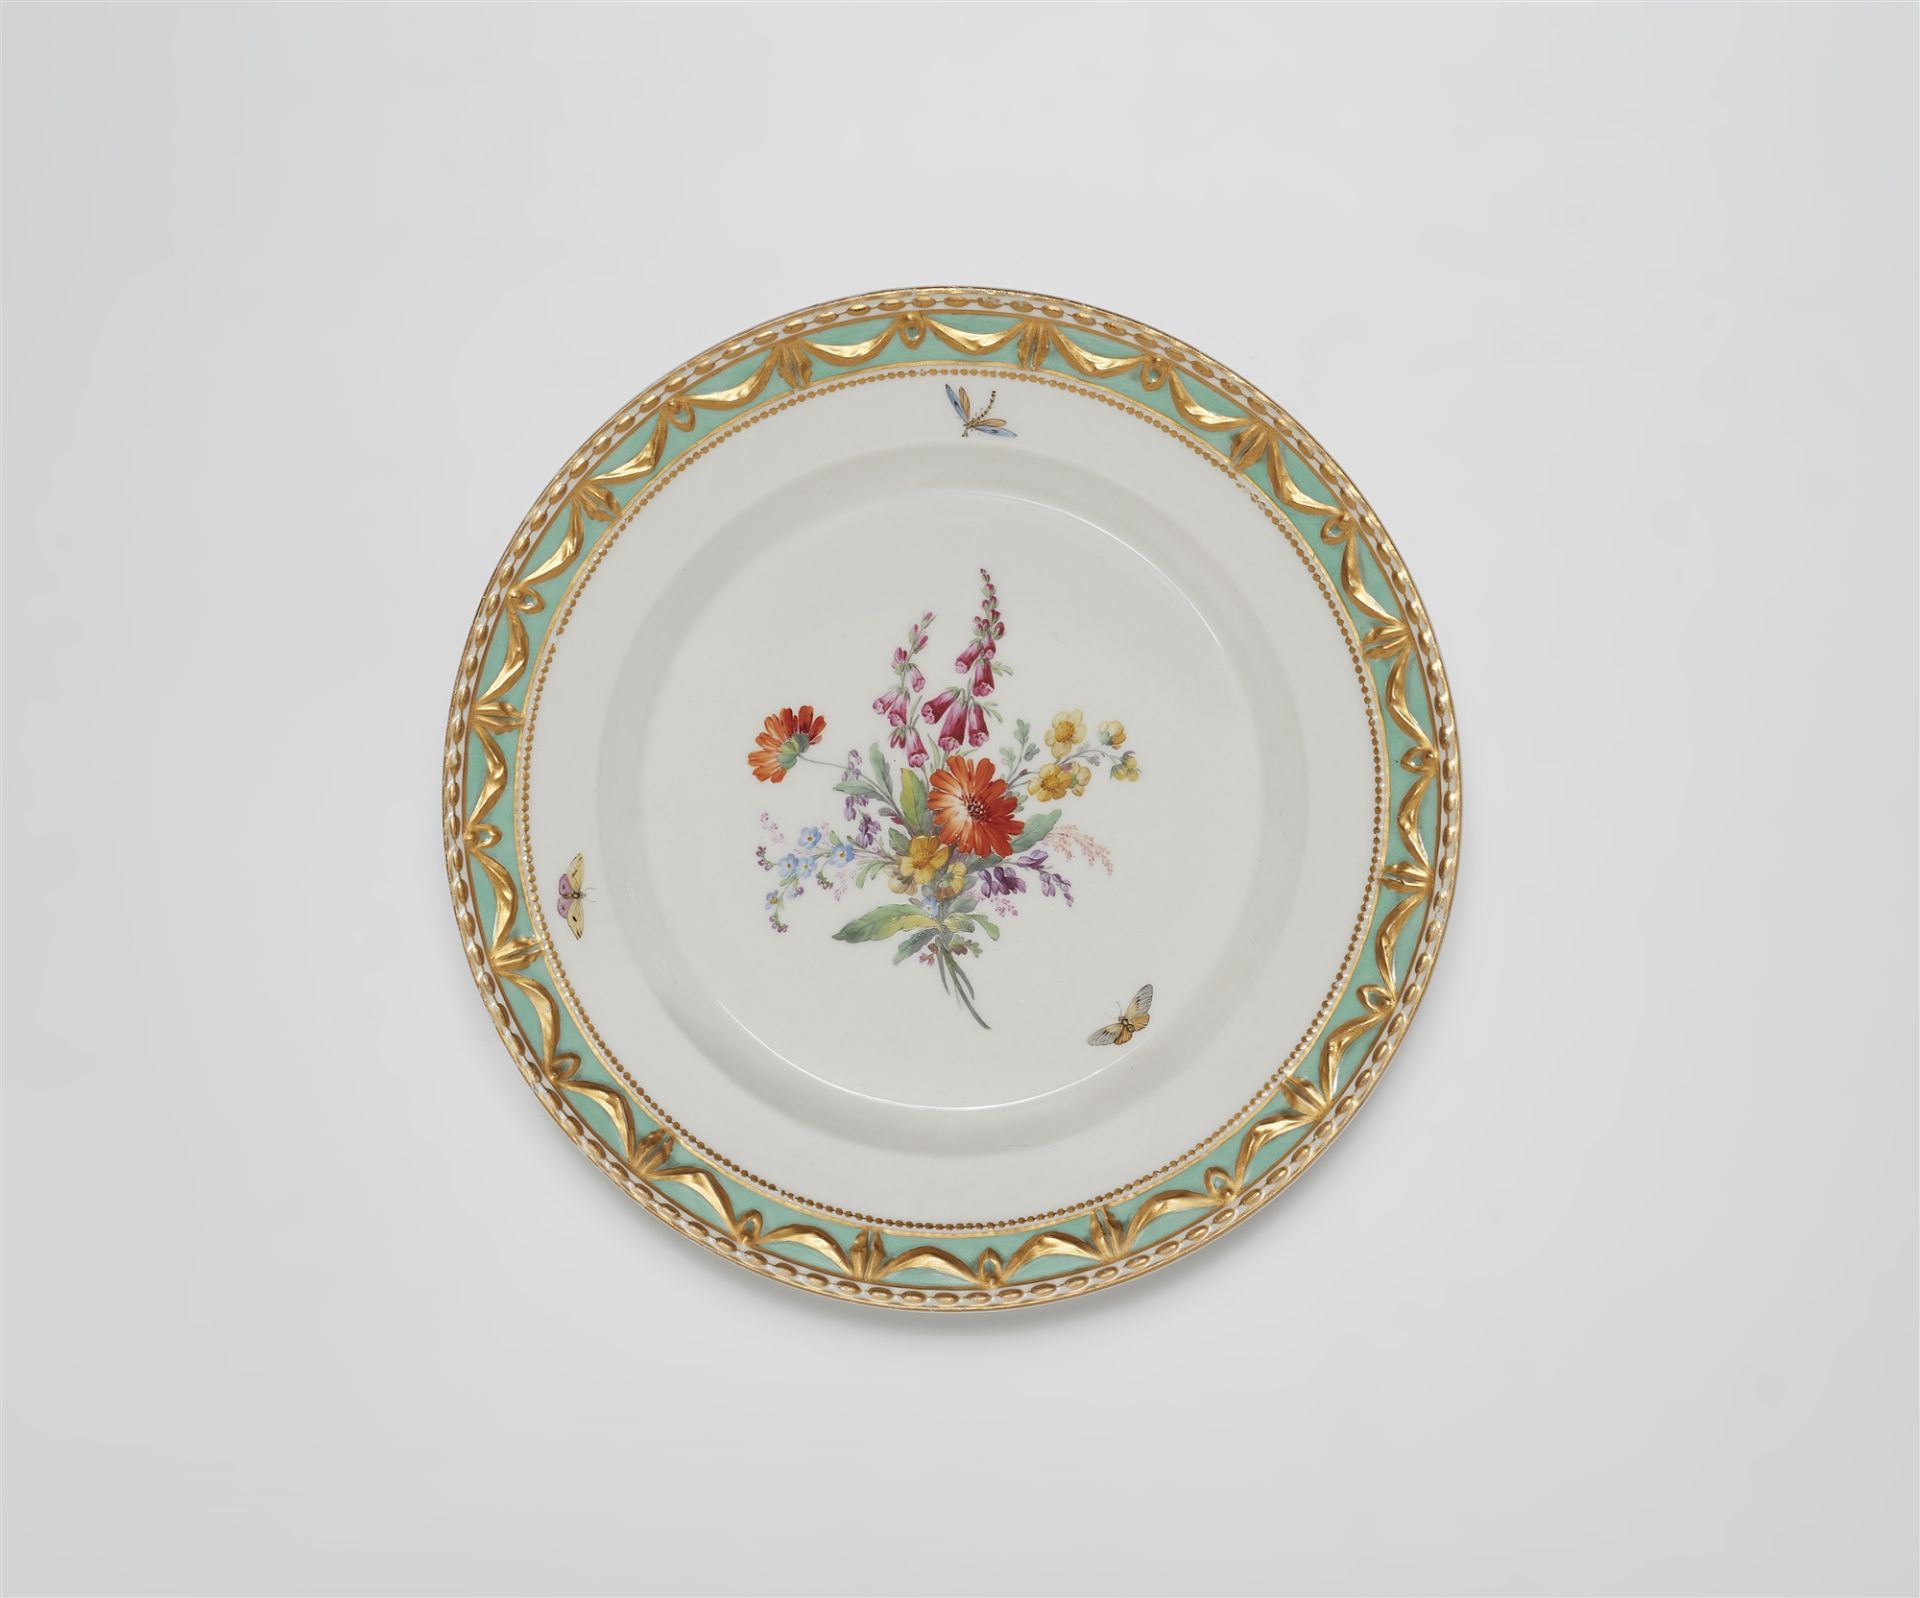 A Berlin KPM porcelain plate from a dinner and dessert service for Prince Heinrich of Prussia